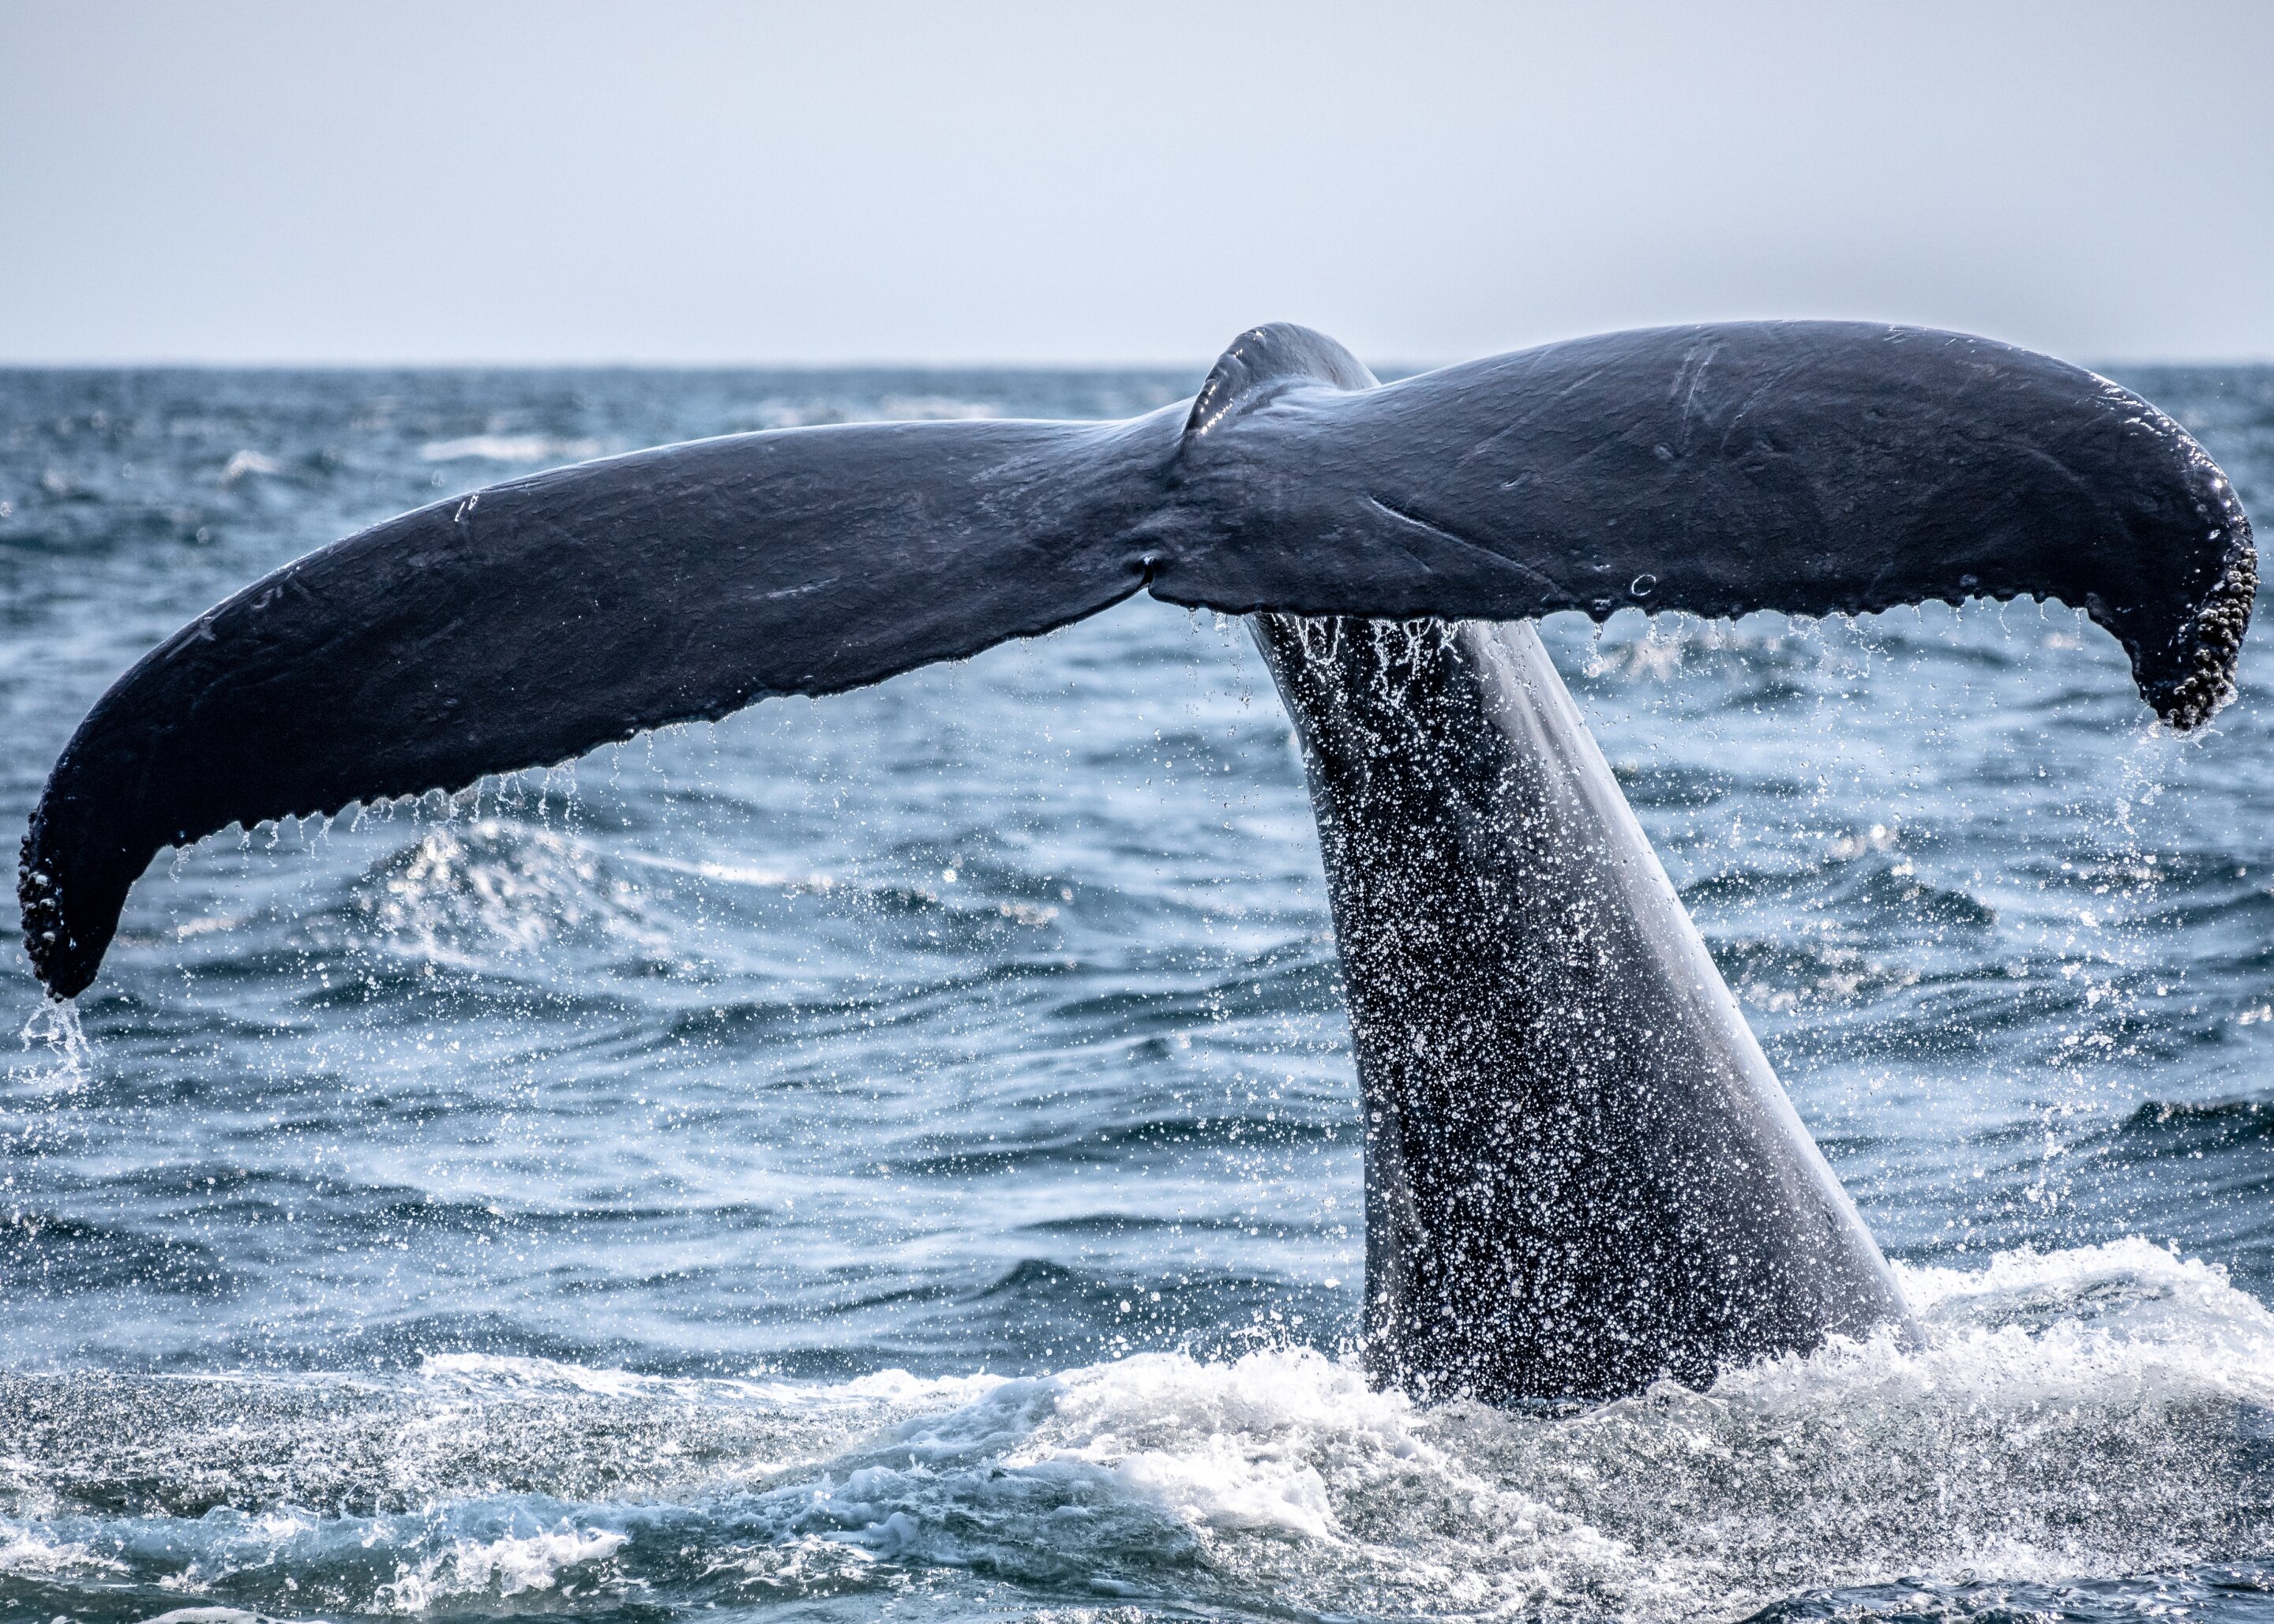 Most blue whales are 'righties,' except for this one move